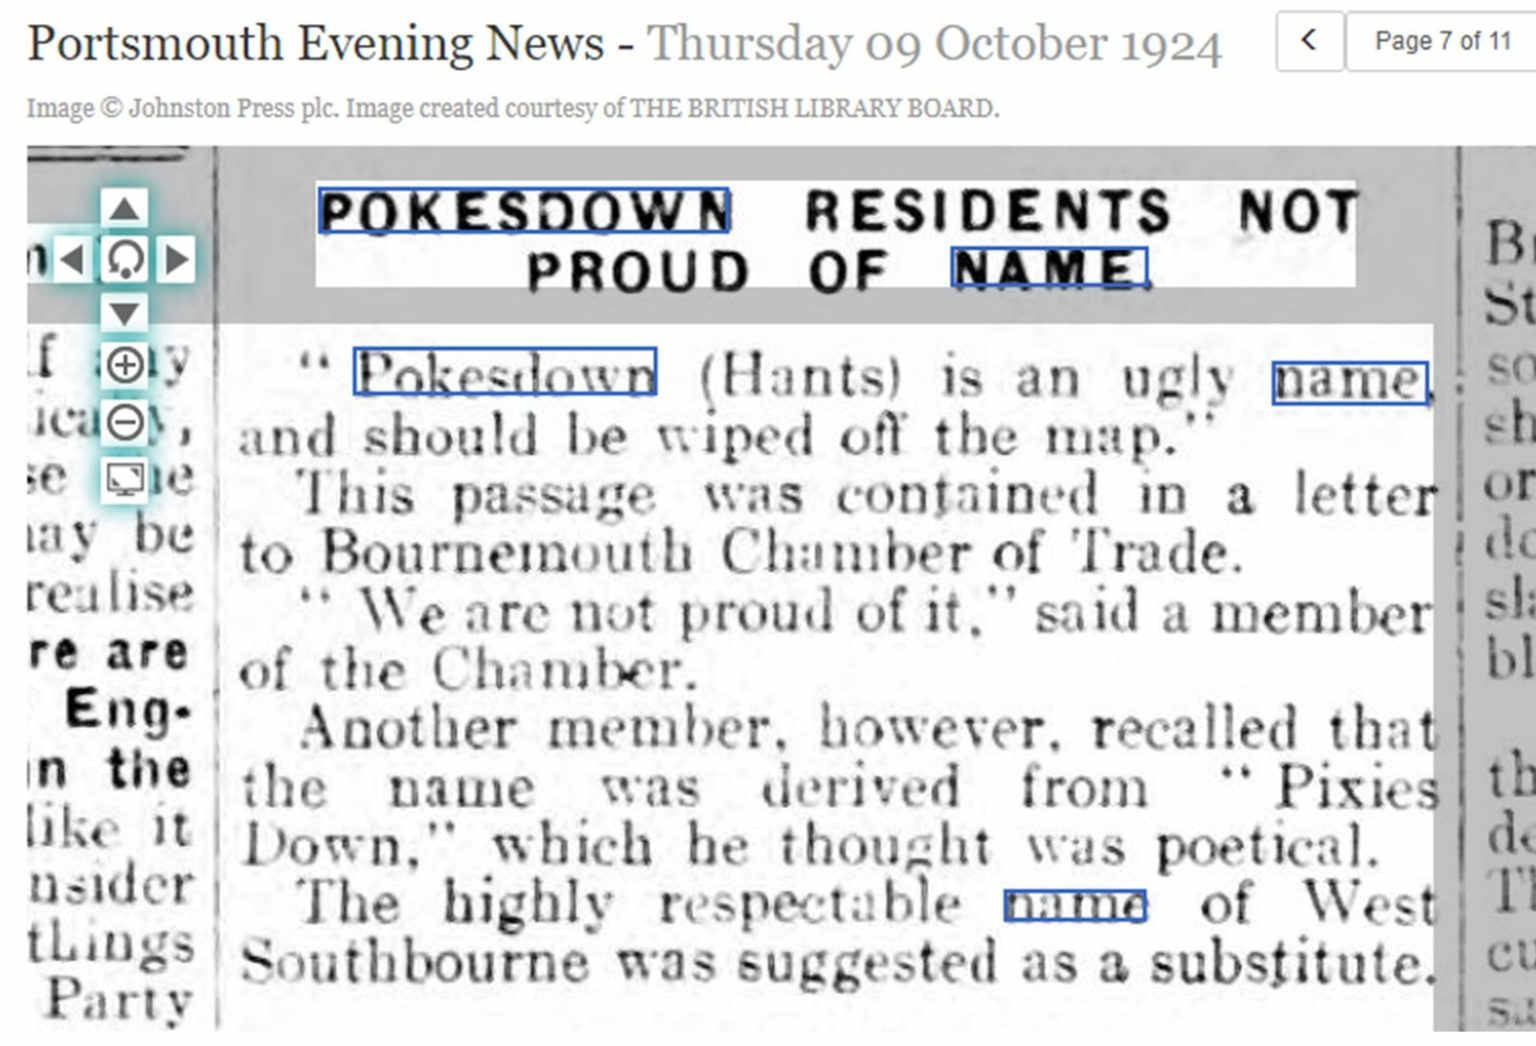 article in Portsmouth Evening News, October 1924, saying Pokesdown is an ugly name